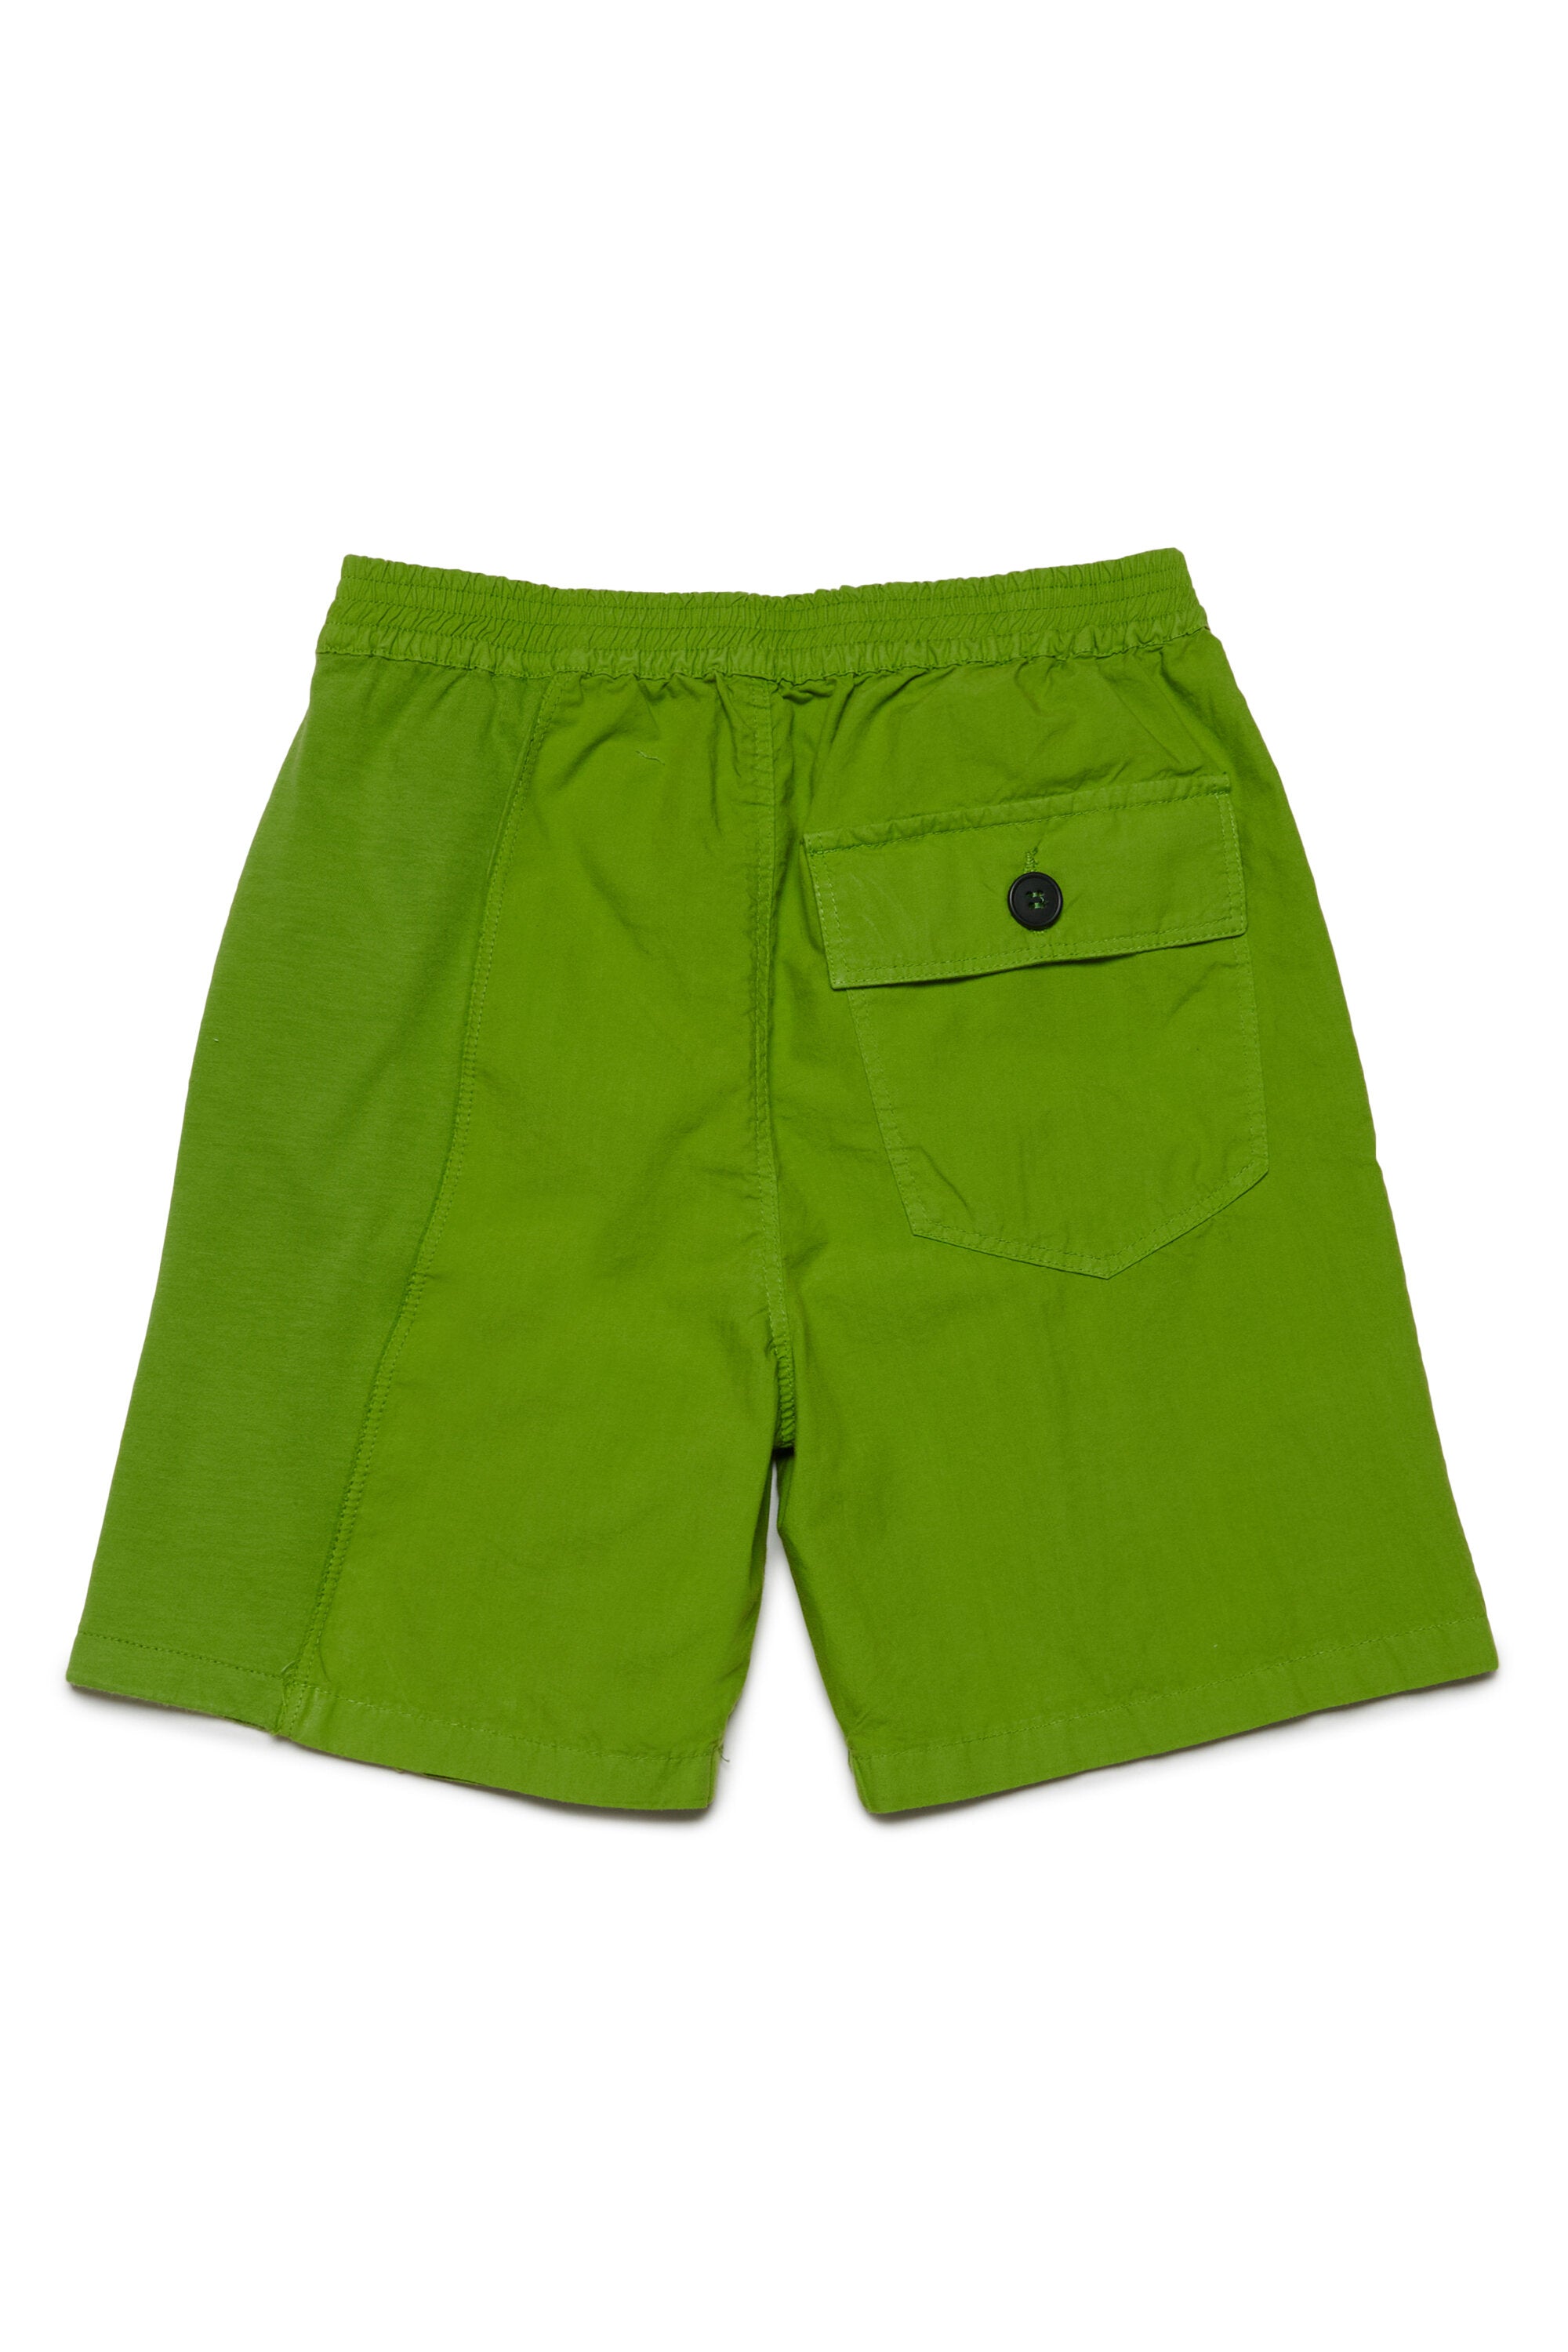 Deadstock fabric shorts with MYAR logo